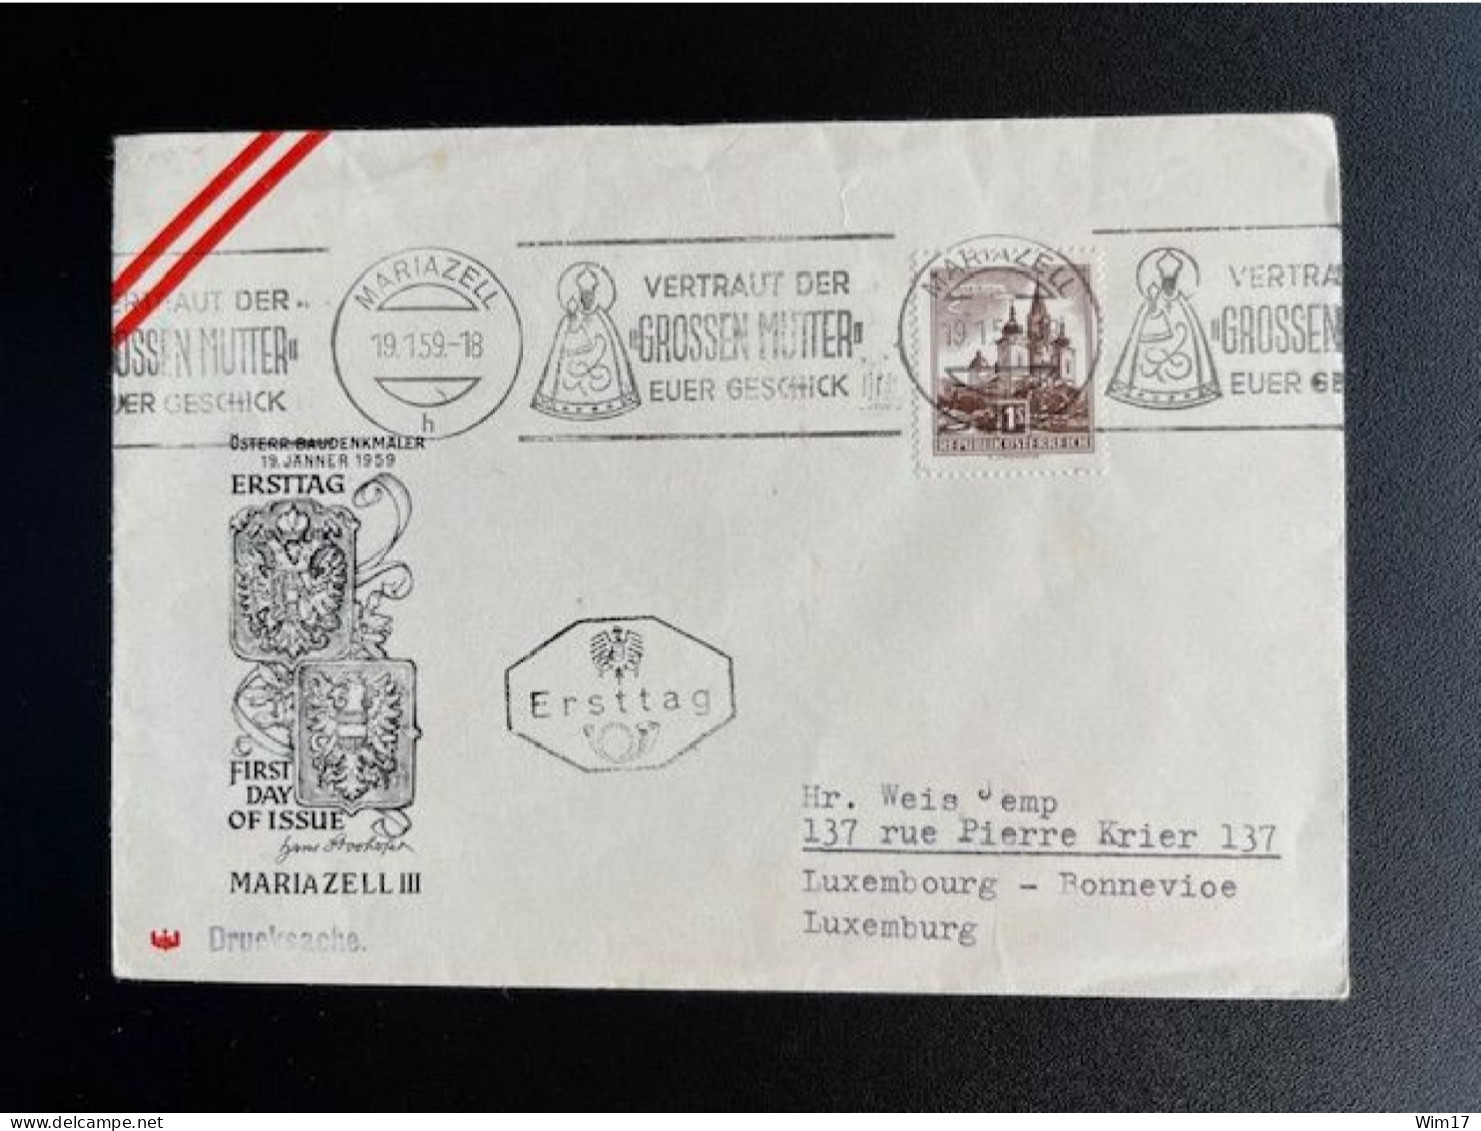 AUSTRIA 1959 LETTER MARIAZELL TO LUXEMBOURG 19-01-1959 OOSTENRIJK OSTERREICH FDC - Storia Postale